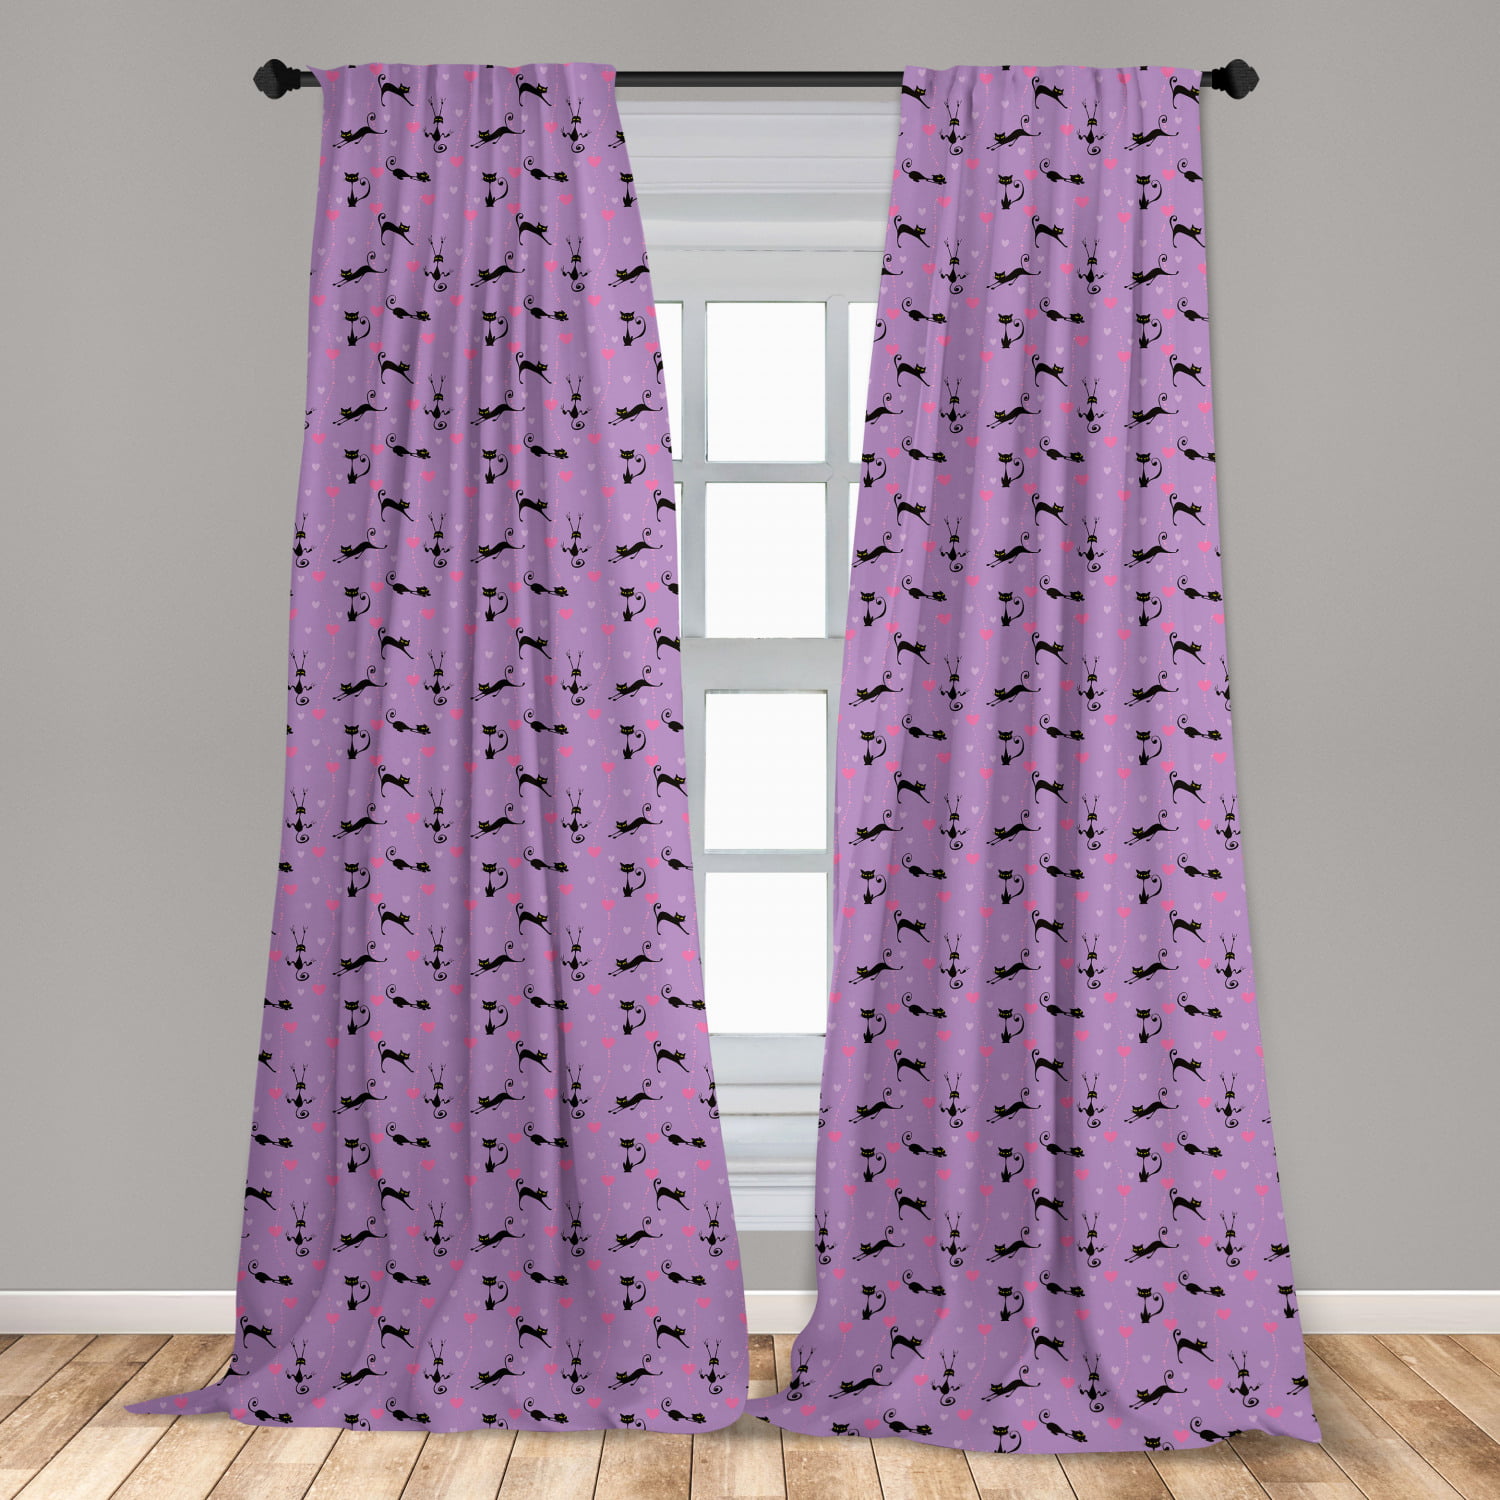 Window Ds For Living Room Bedroom, Black And Purple Bedroom Curtains